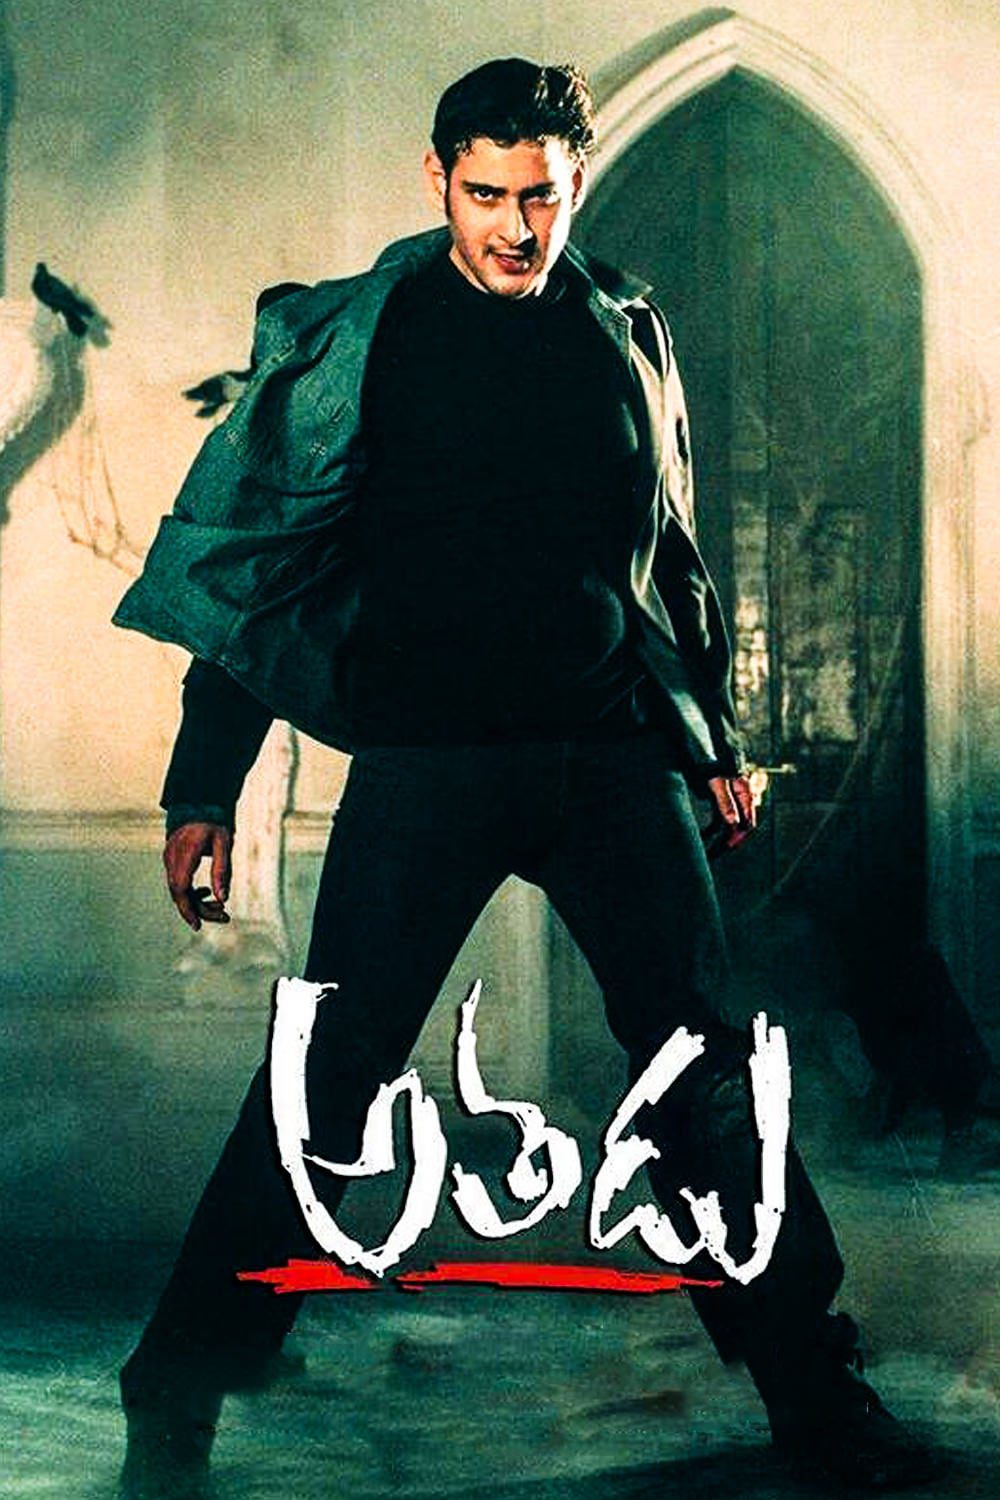 Poster for the movie "Athadu"